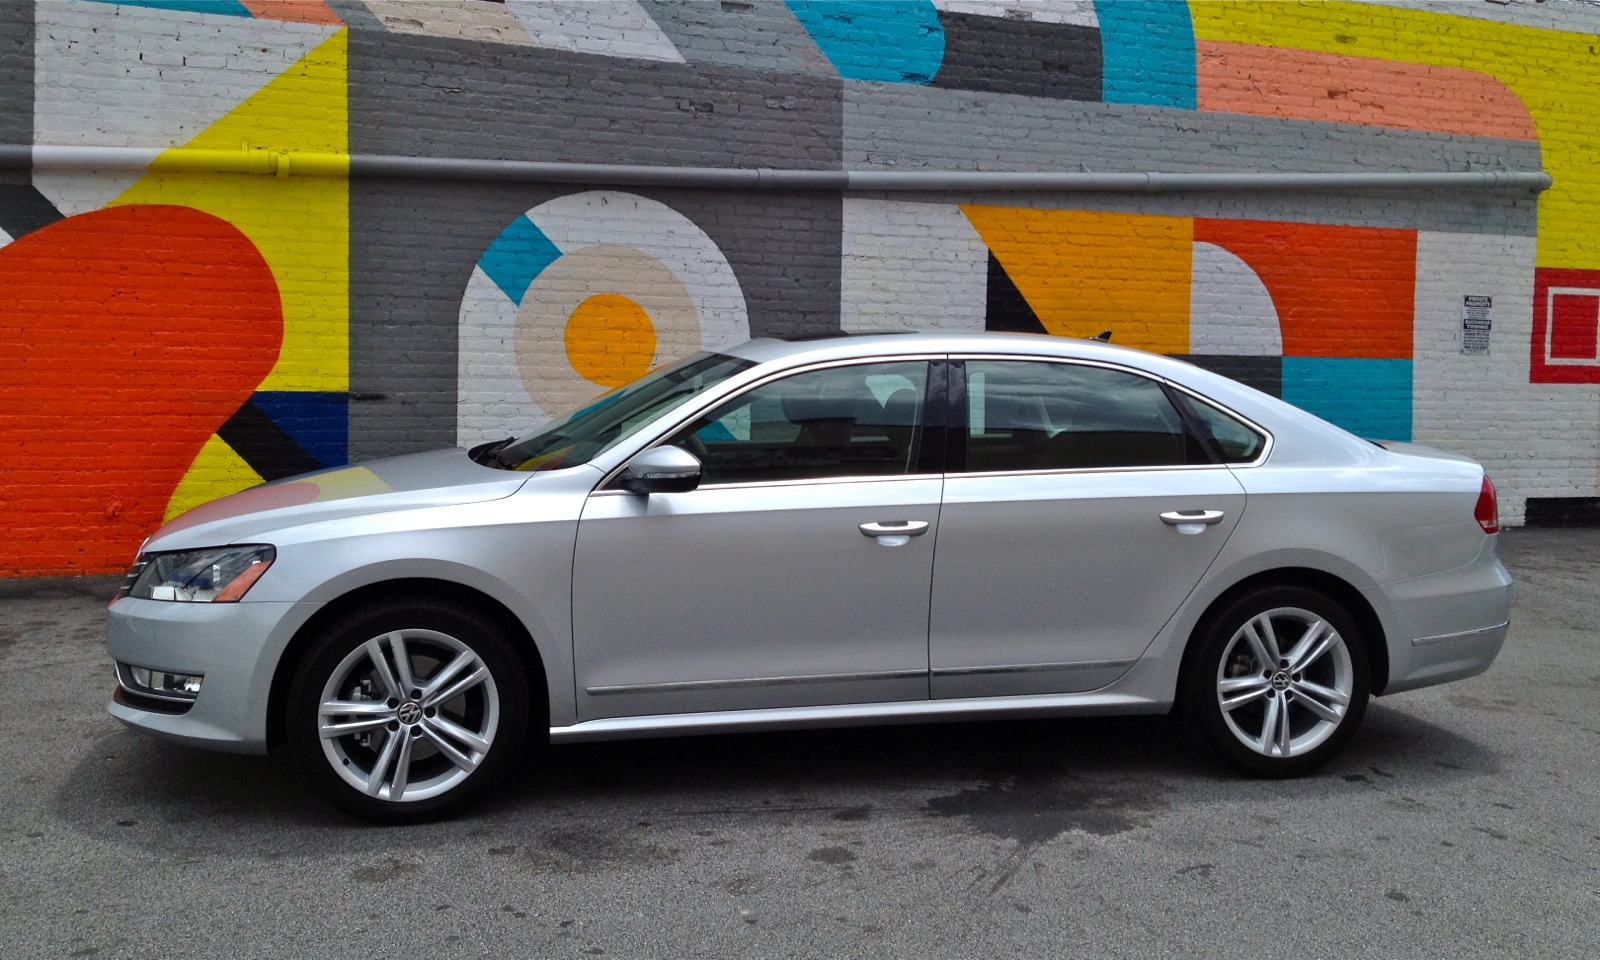 2012 VW Passat Six-Month Road Test: Do You Really Need An SUV?